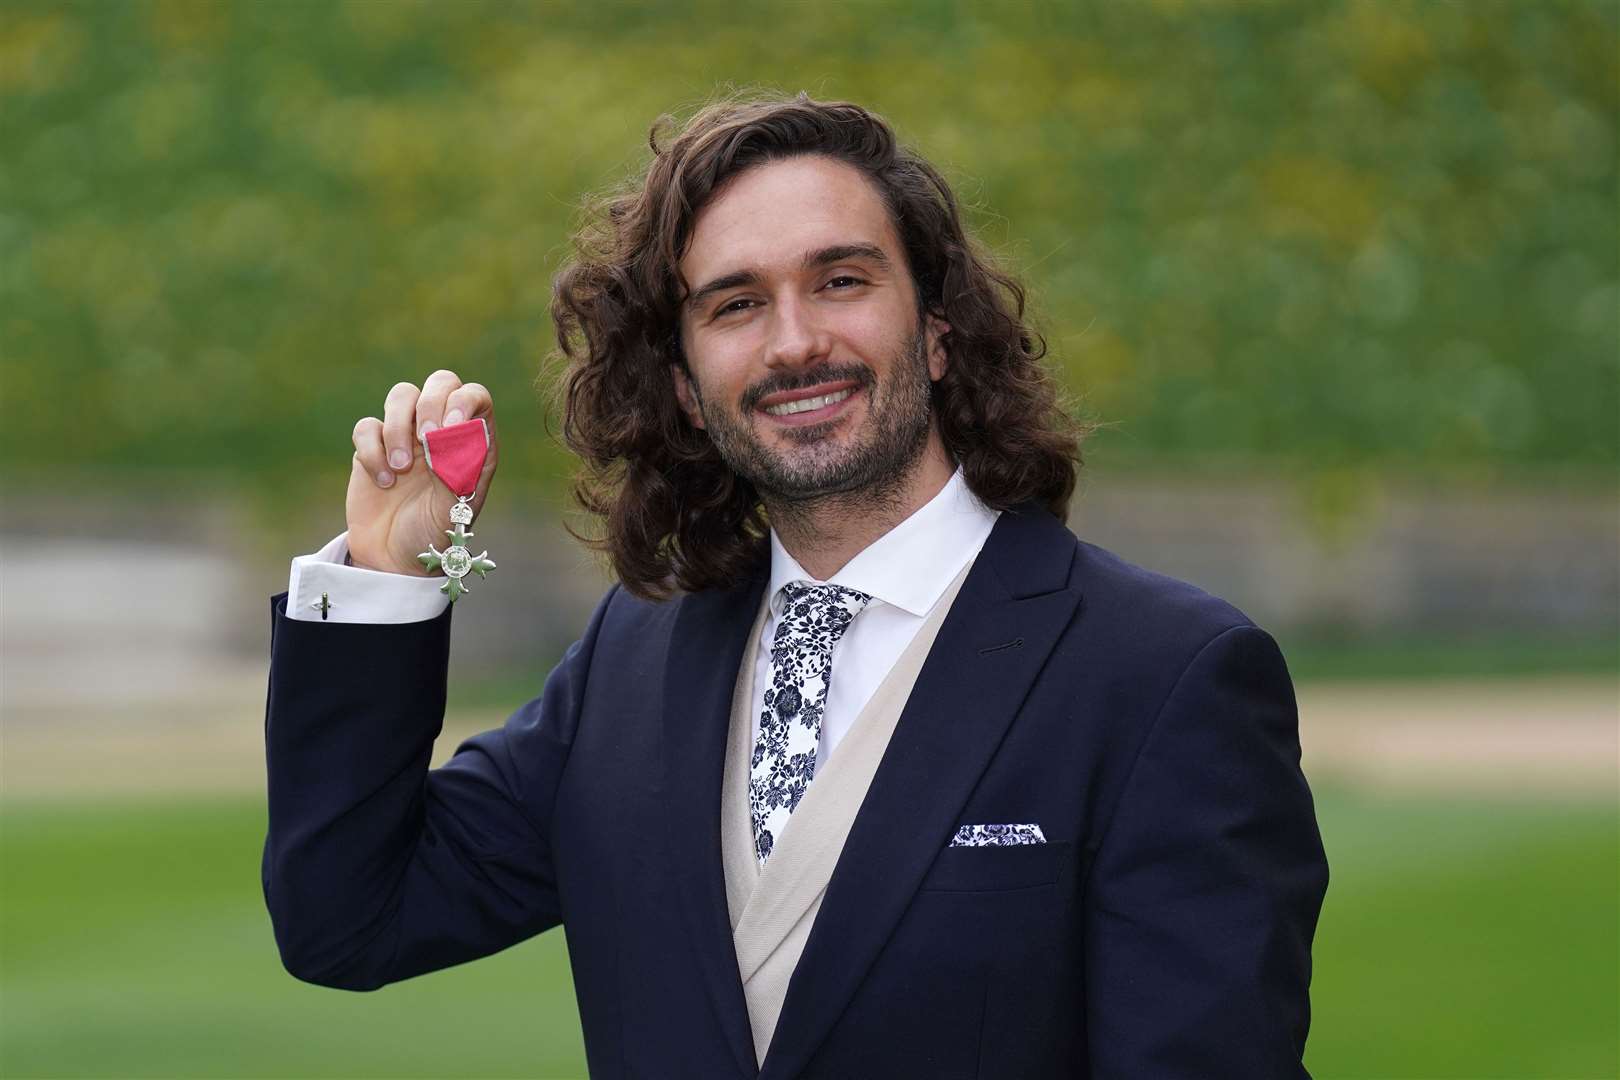 Joe Wicks, pictured, after receiving his MBE medal from the Princess Royal in March (Steve Parsons/PA)